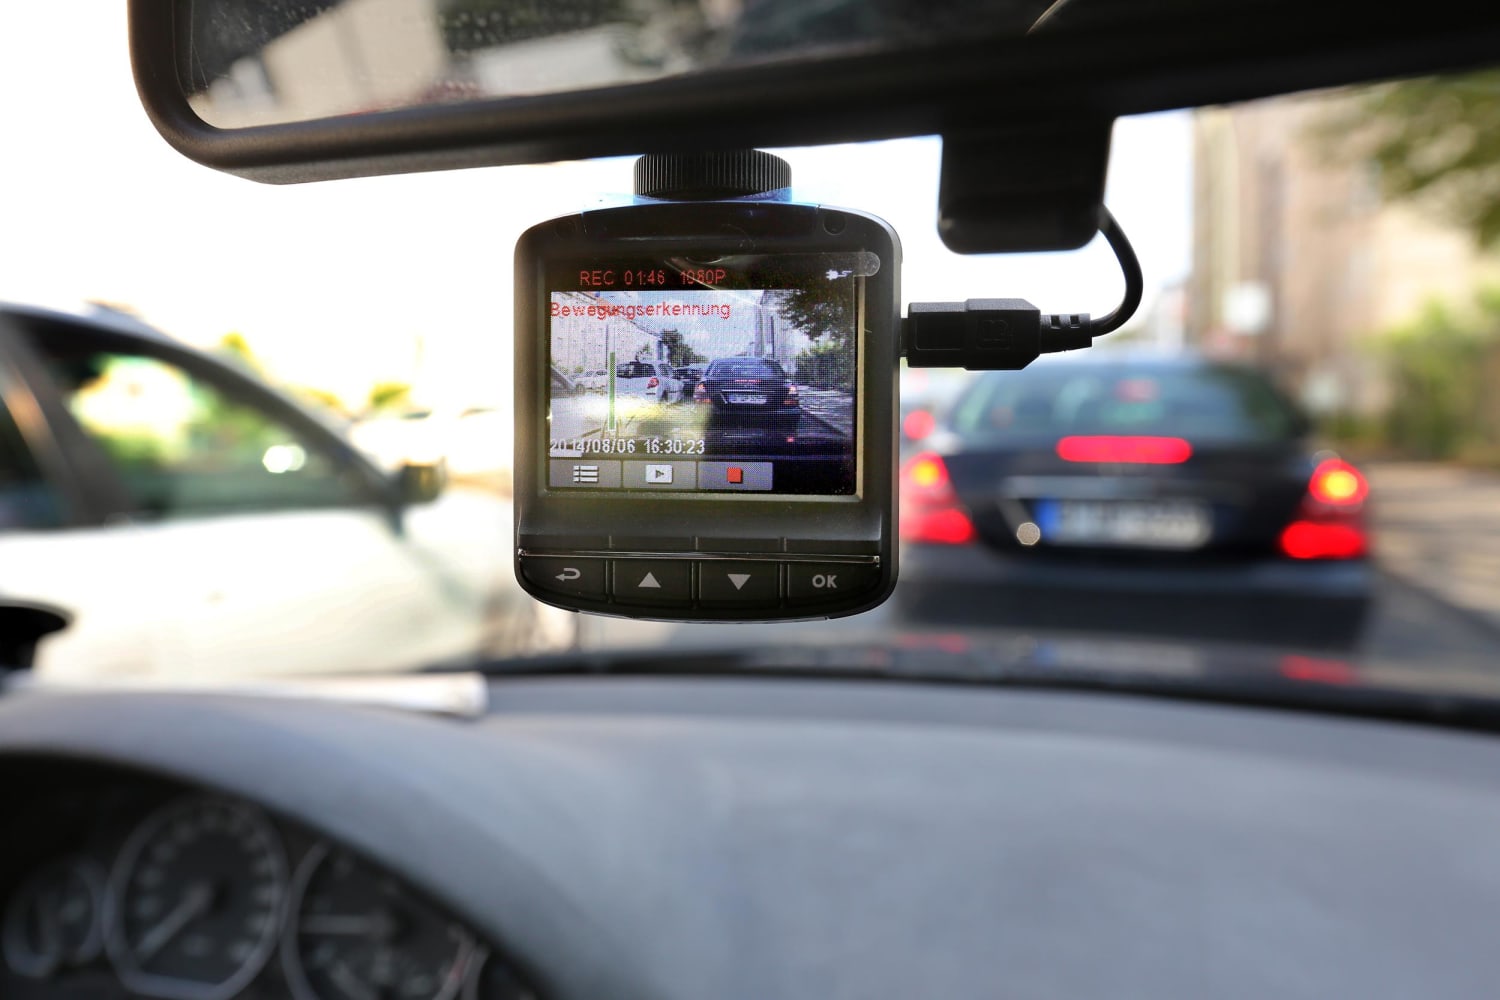 German supreme court cites our research in its ruling on dashcam